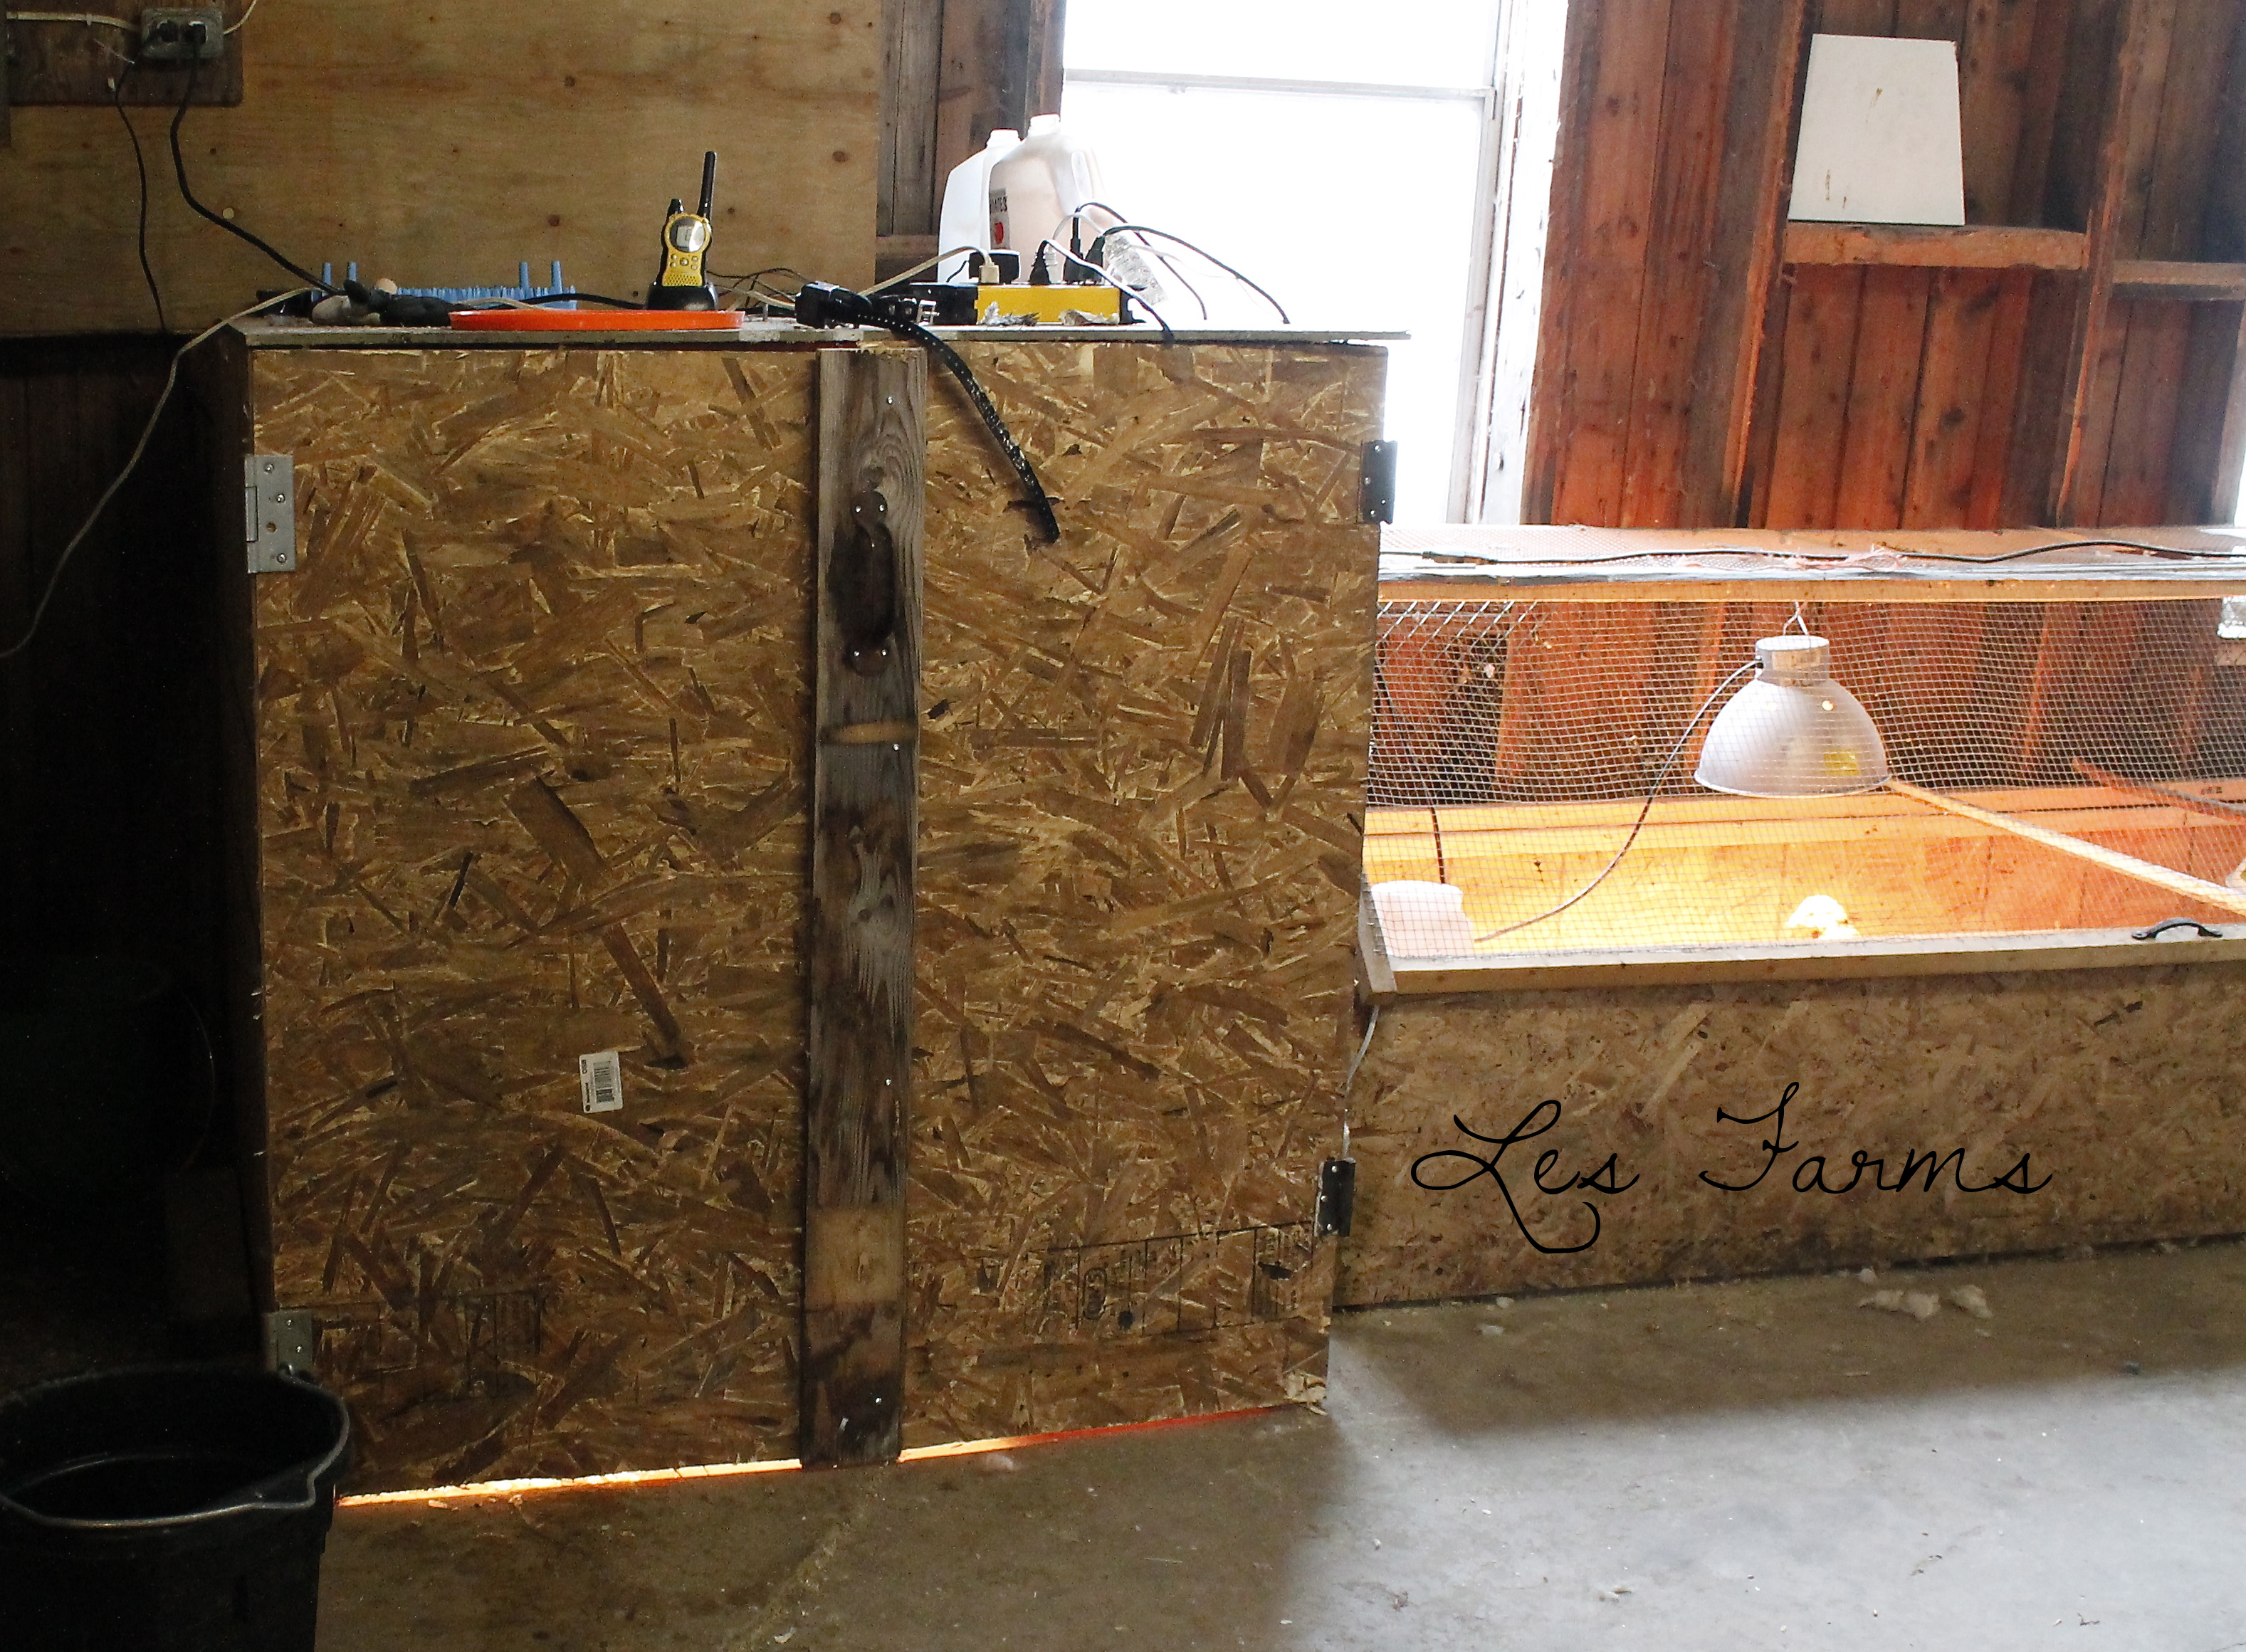 My heated FF closet in the barn. I did not want to lug down buckets of feed from the house every morning in winter. My solution was to create a heated place in the barn where it would keep it cooking, and prevent it from freezing. This closet stays 75F in temps outside @ -20F